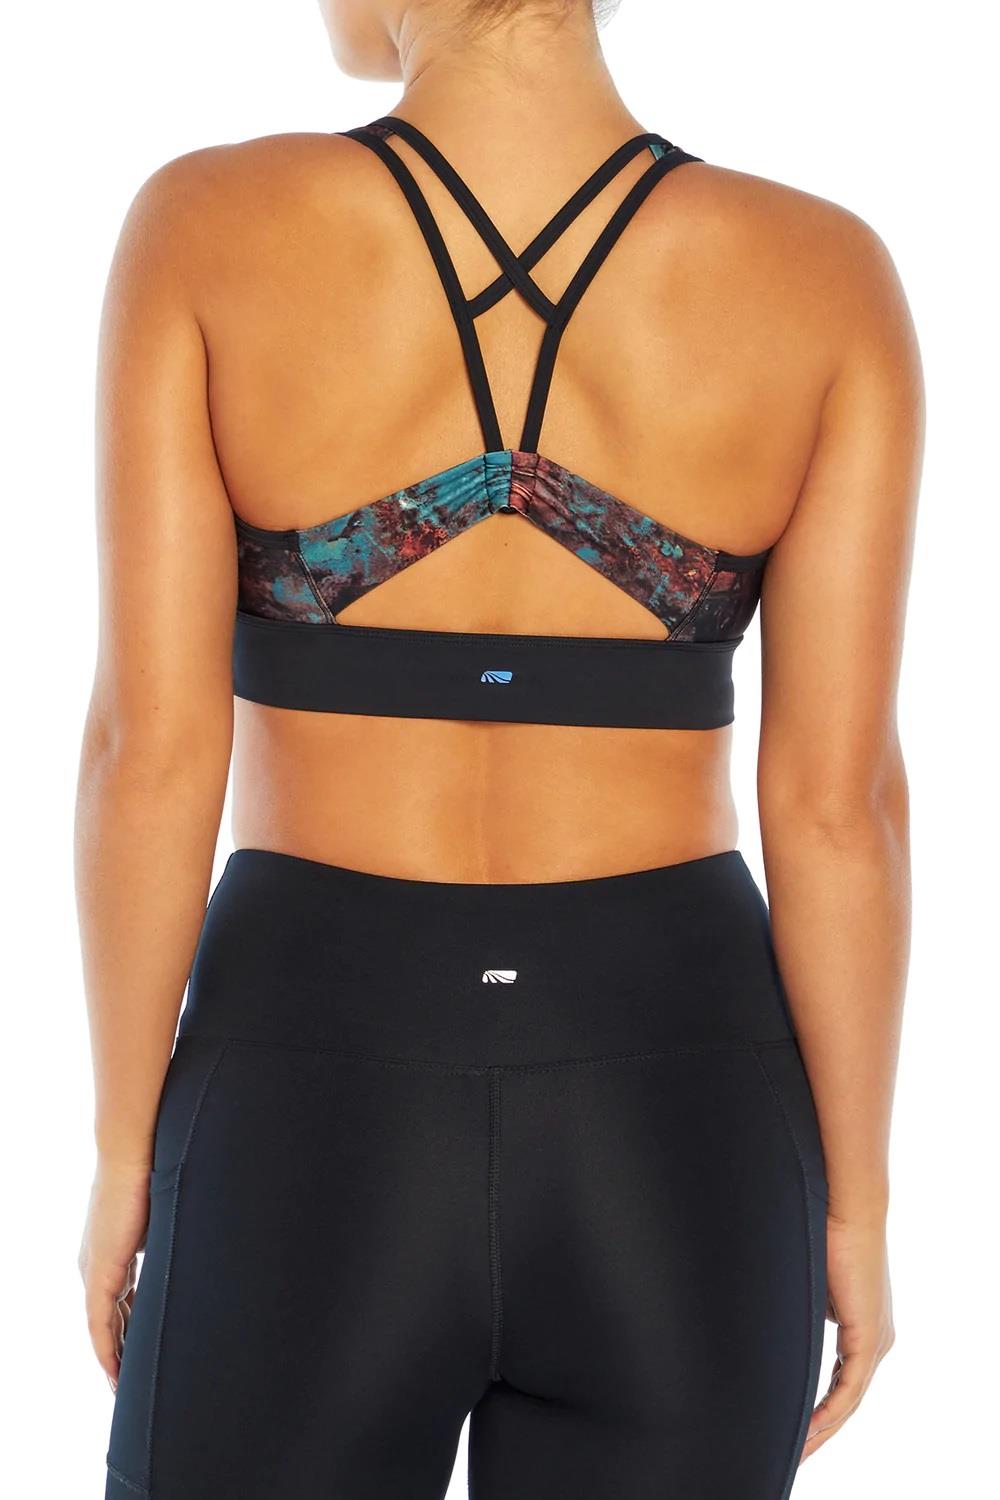 Cycle House Sports Bra Non-Wired Removable Padding Banded Racerback Gym Yoga Top